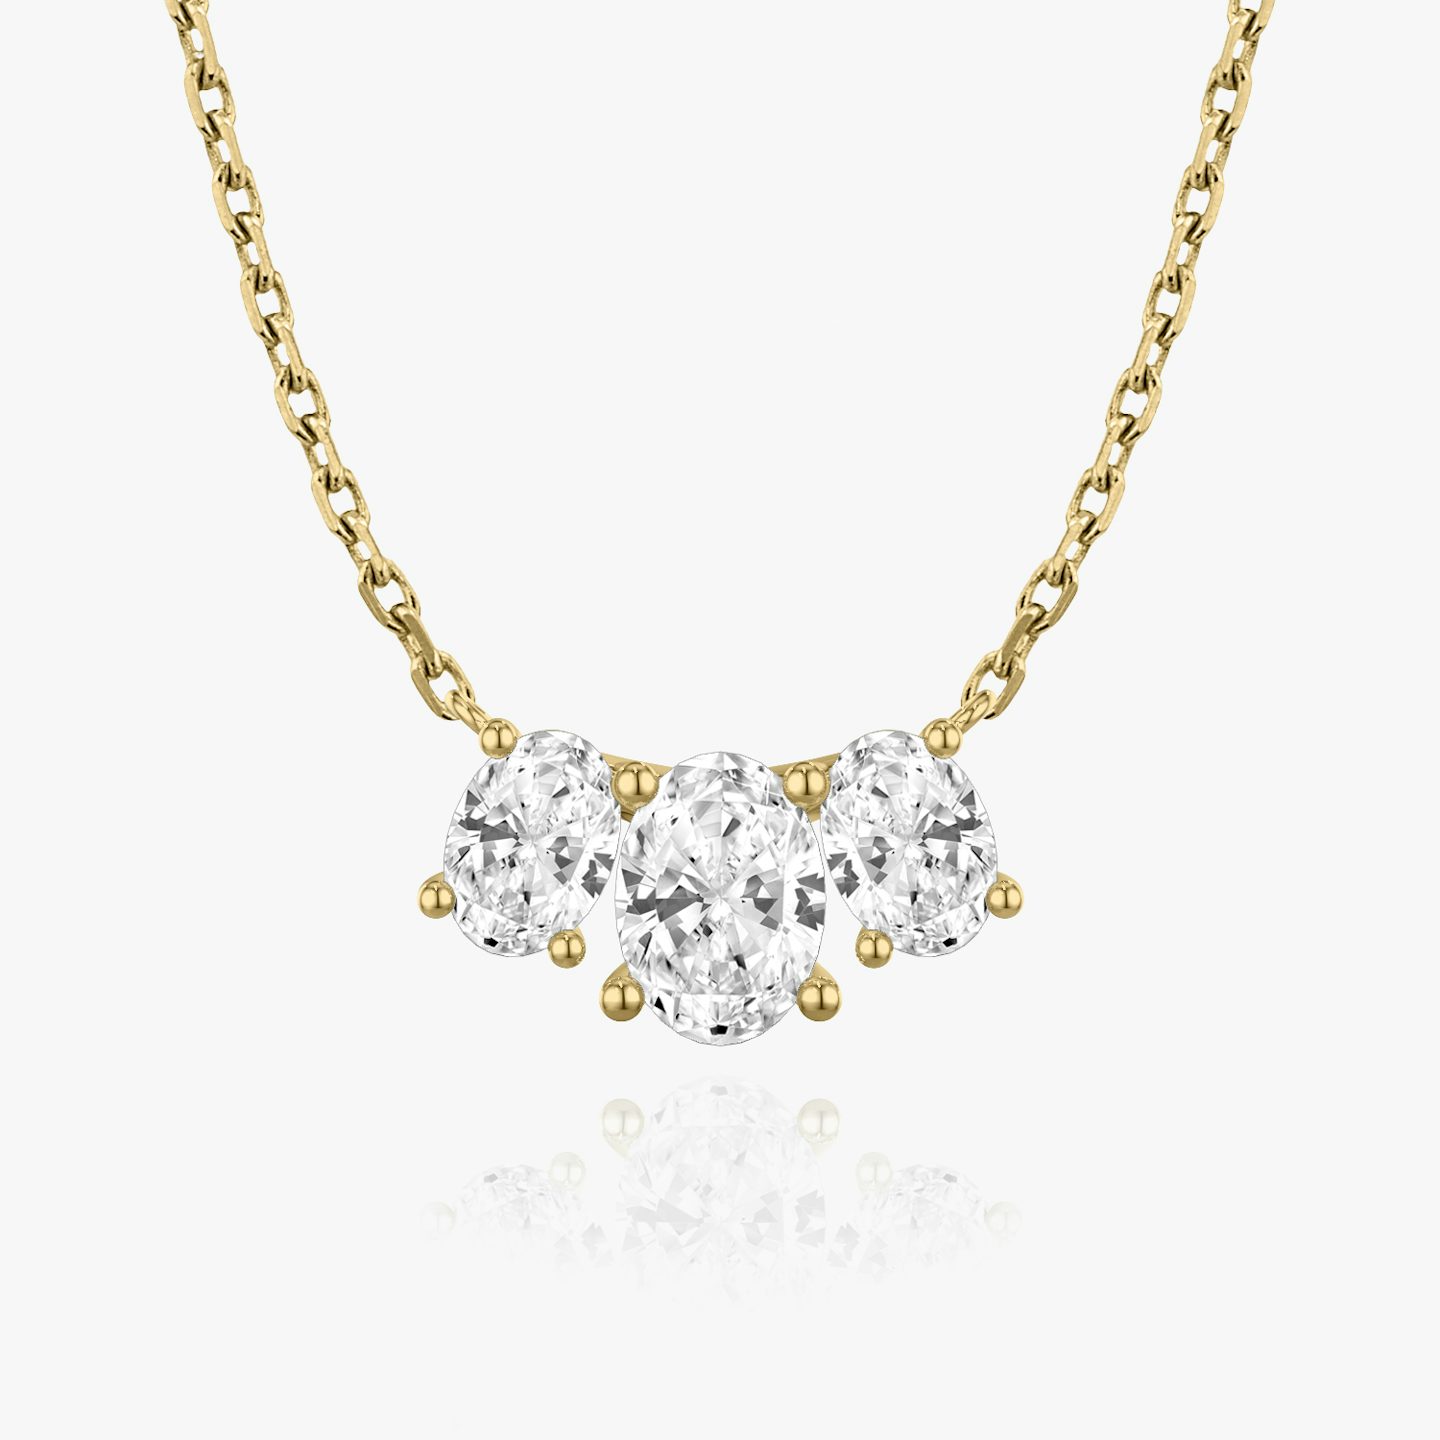 Arc Necklace | Oval | 14k | 18k Yellow Gold | Chain length: 16-18 | Diamond size: Large | Diamond count: 3